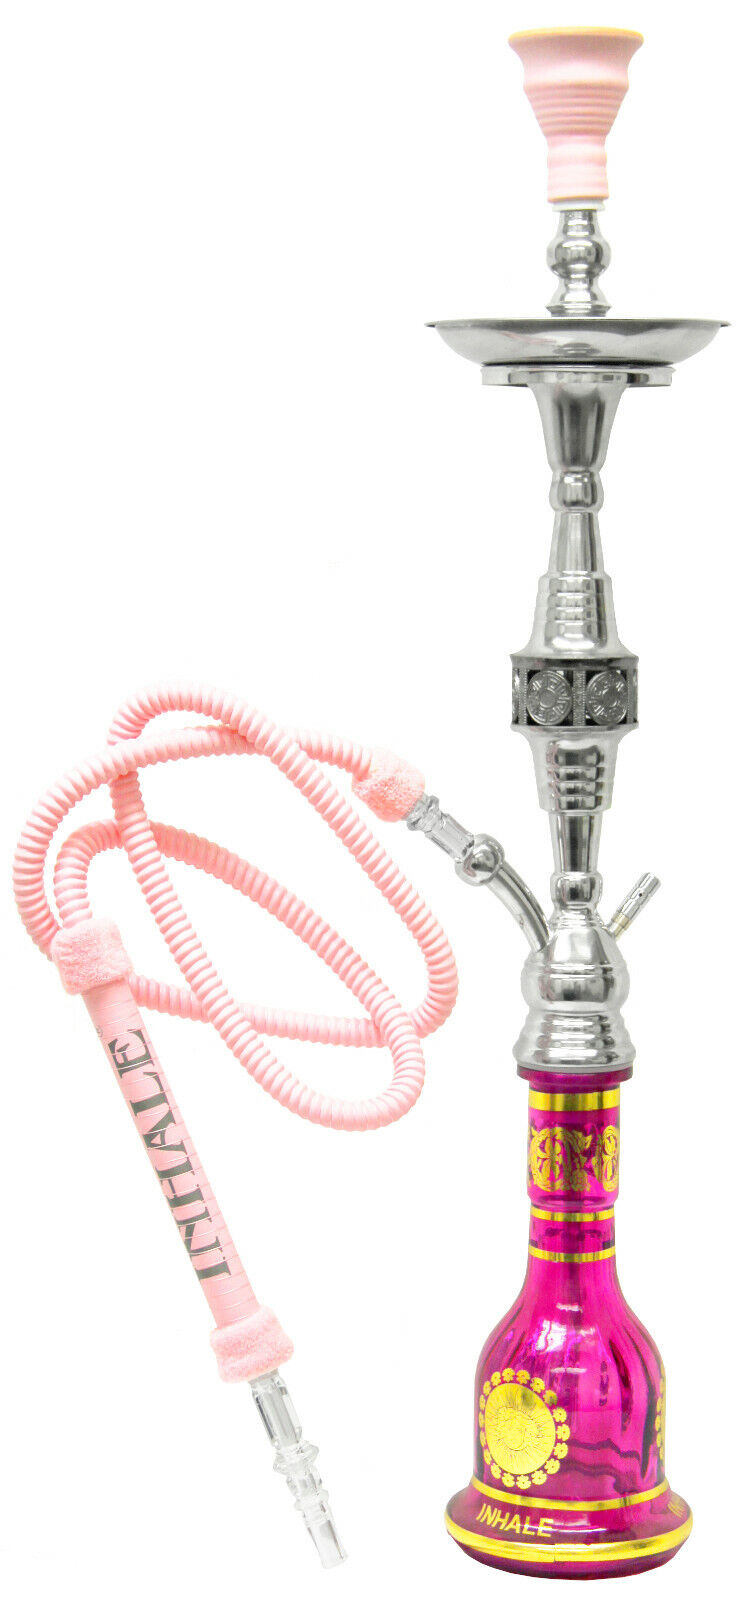 Inhale 34 Inches stainless steel shaft money hookah 